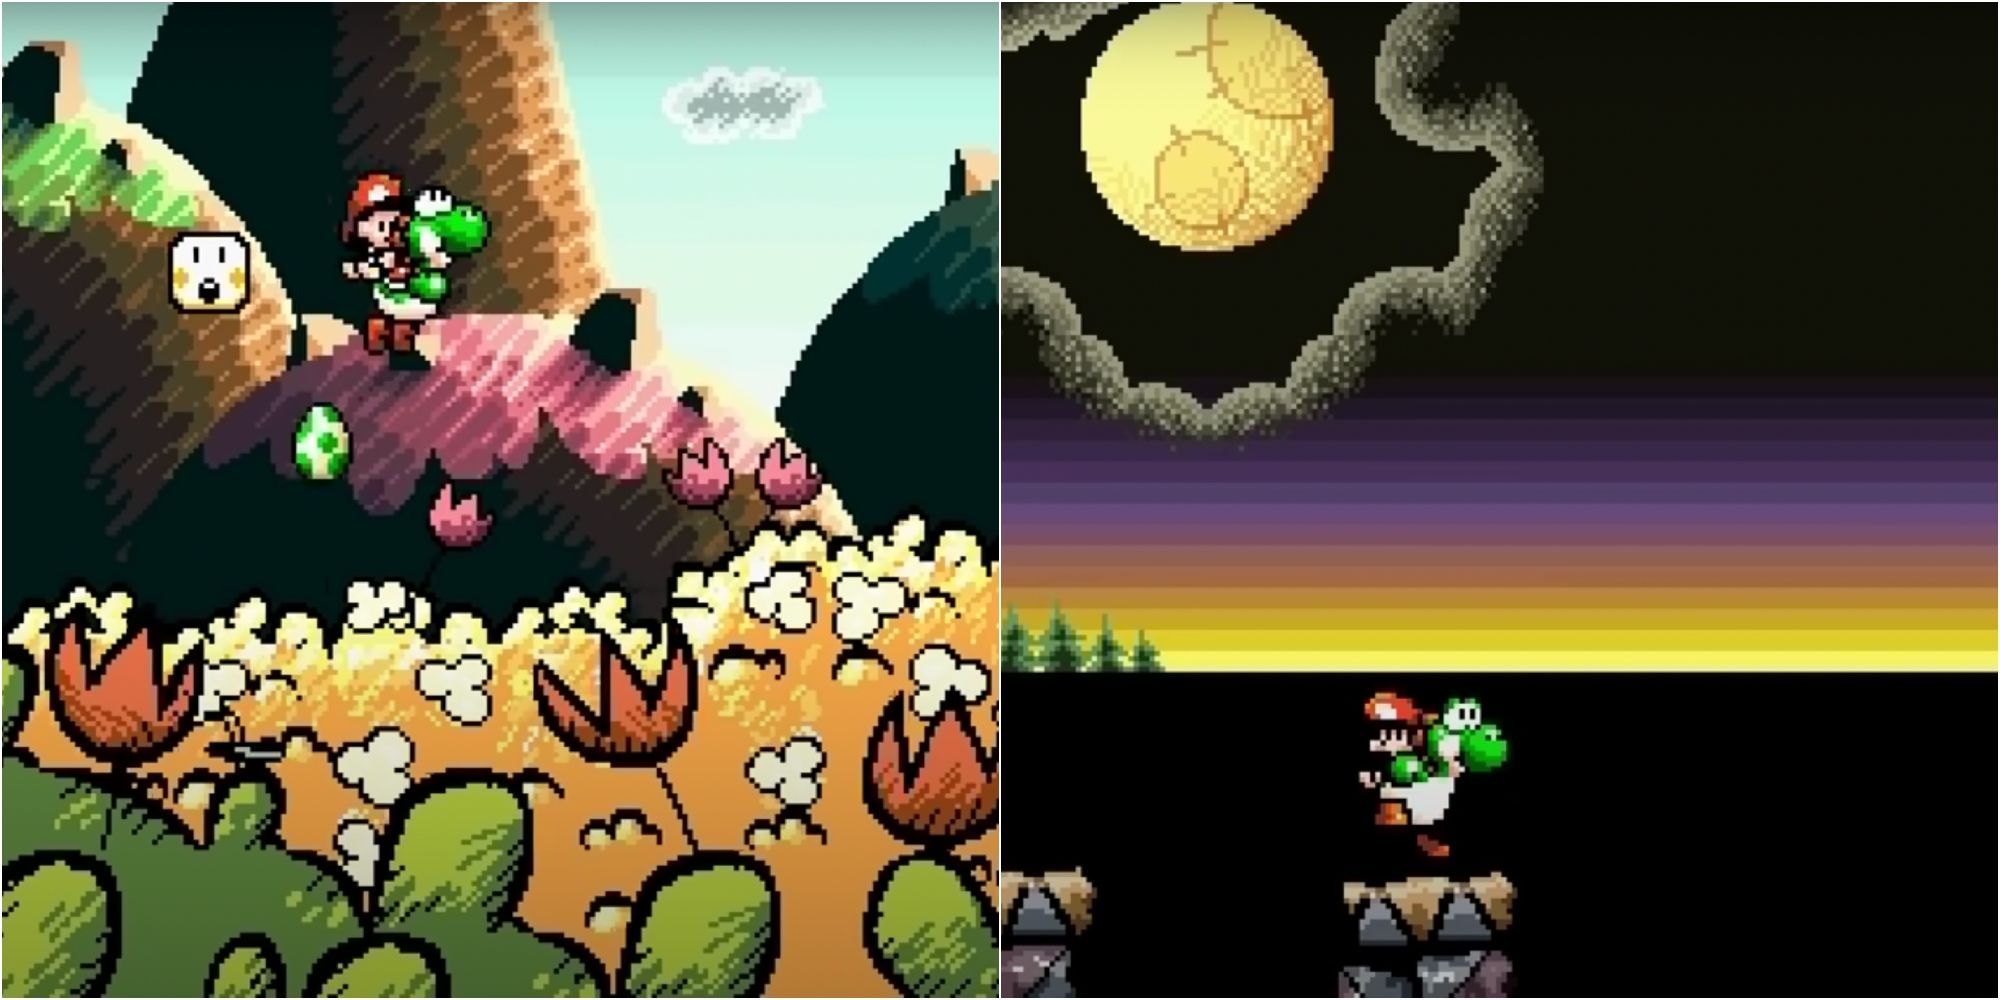 Yoshi's Island, Yoshi jumping with baby Mario on his back, beside a picture of Yoshi with Baby Mario in a dark sky with the moon in the top left